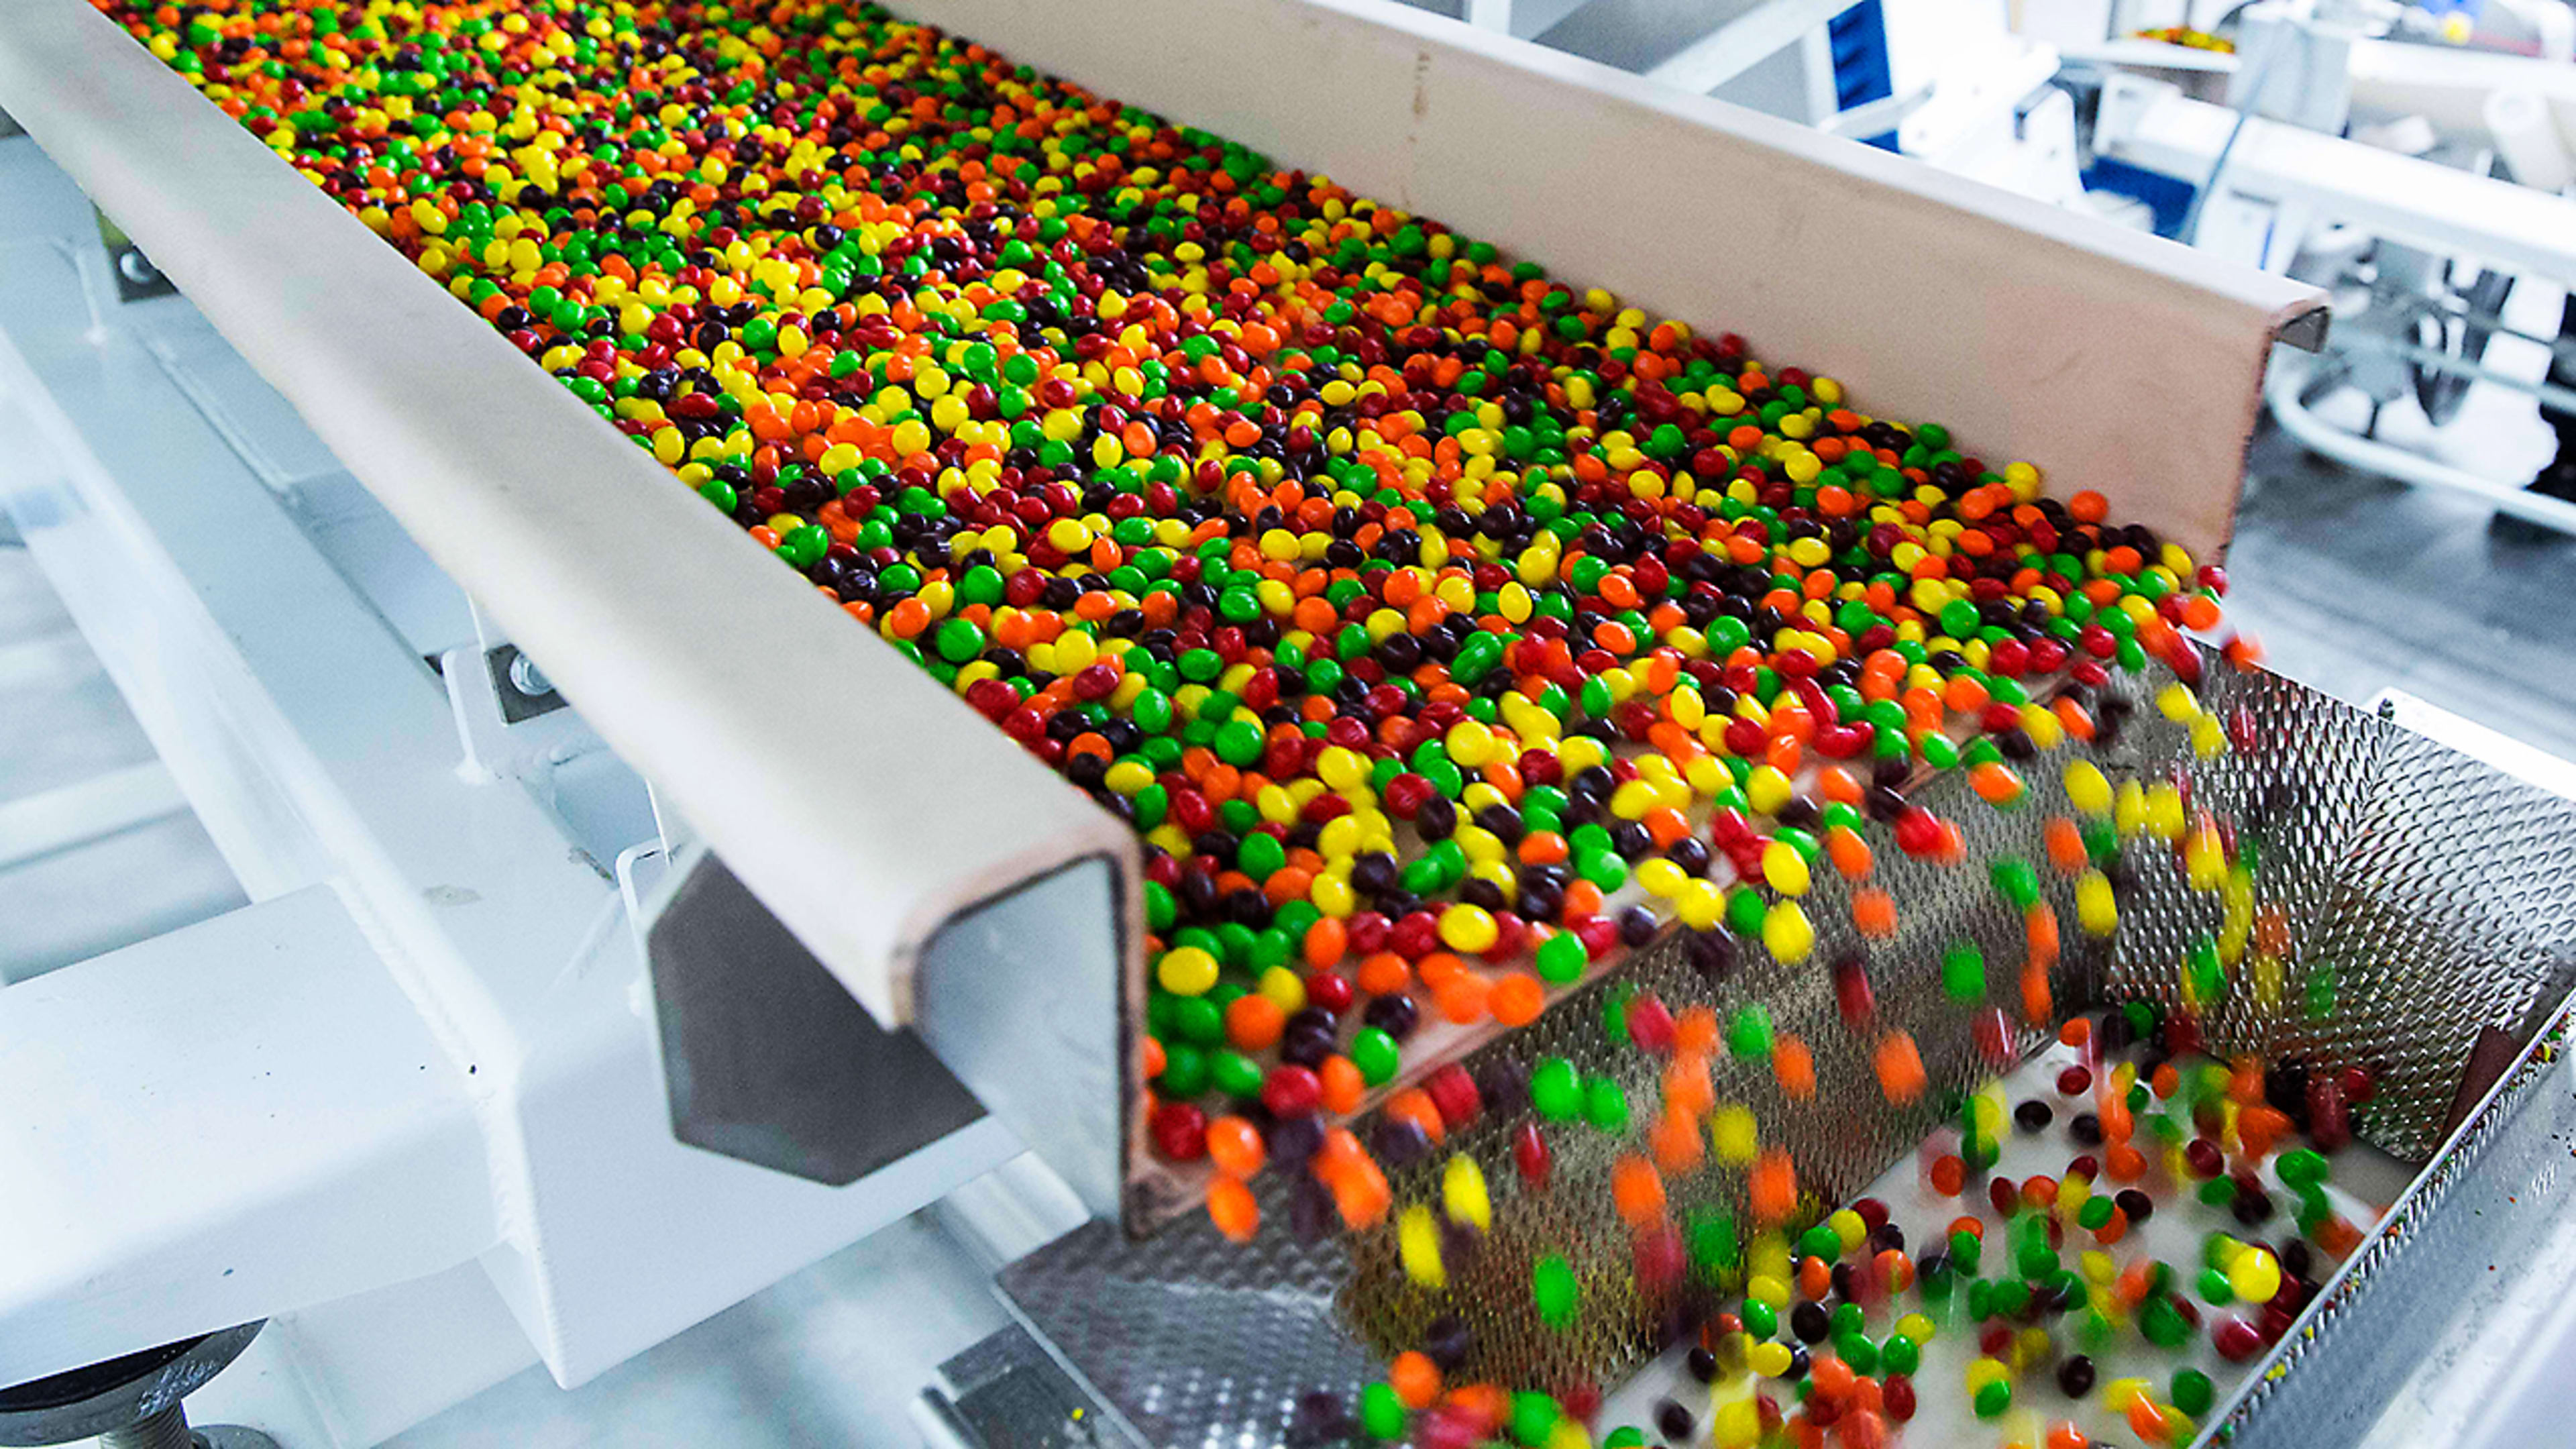 Dream Job Alert: This 26-Year-Old Spends Her Days Inventing New Candy Flavors